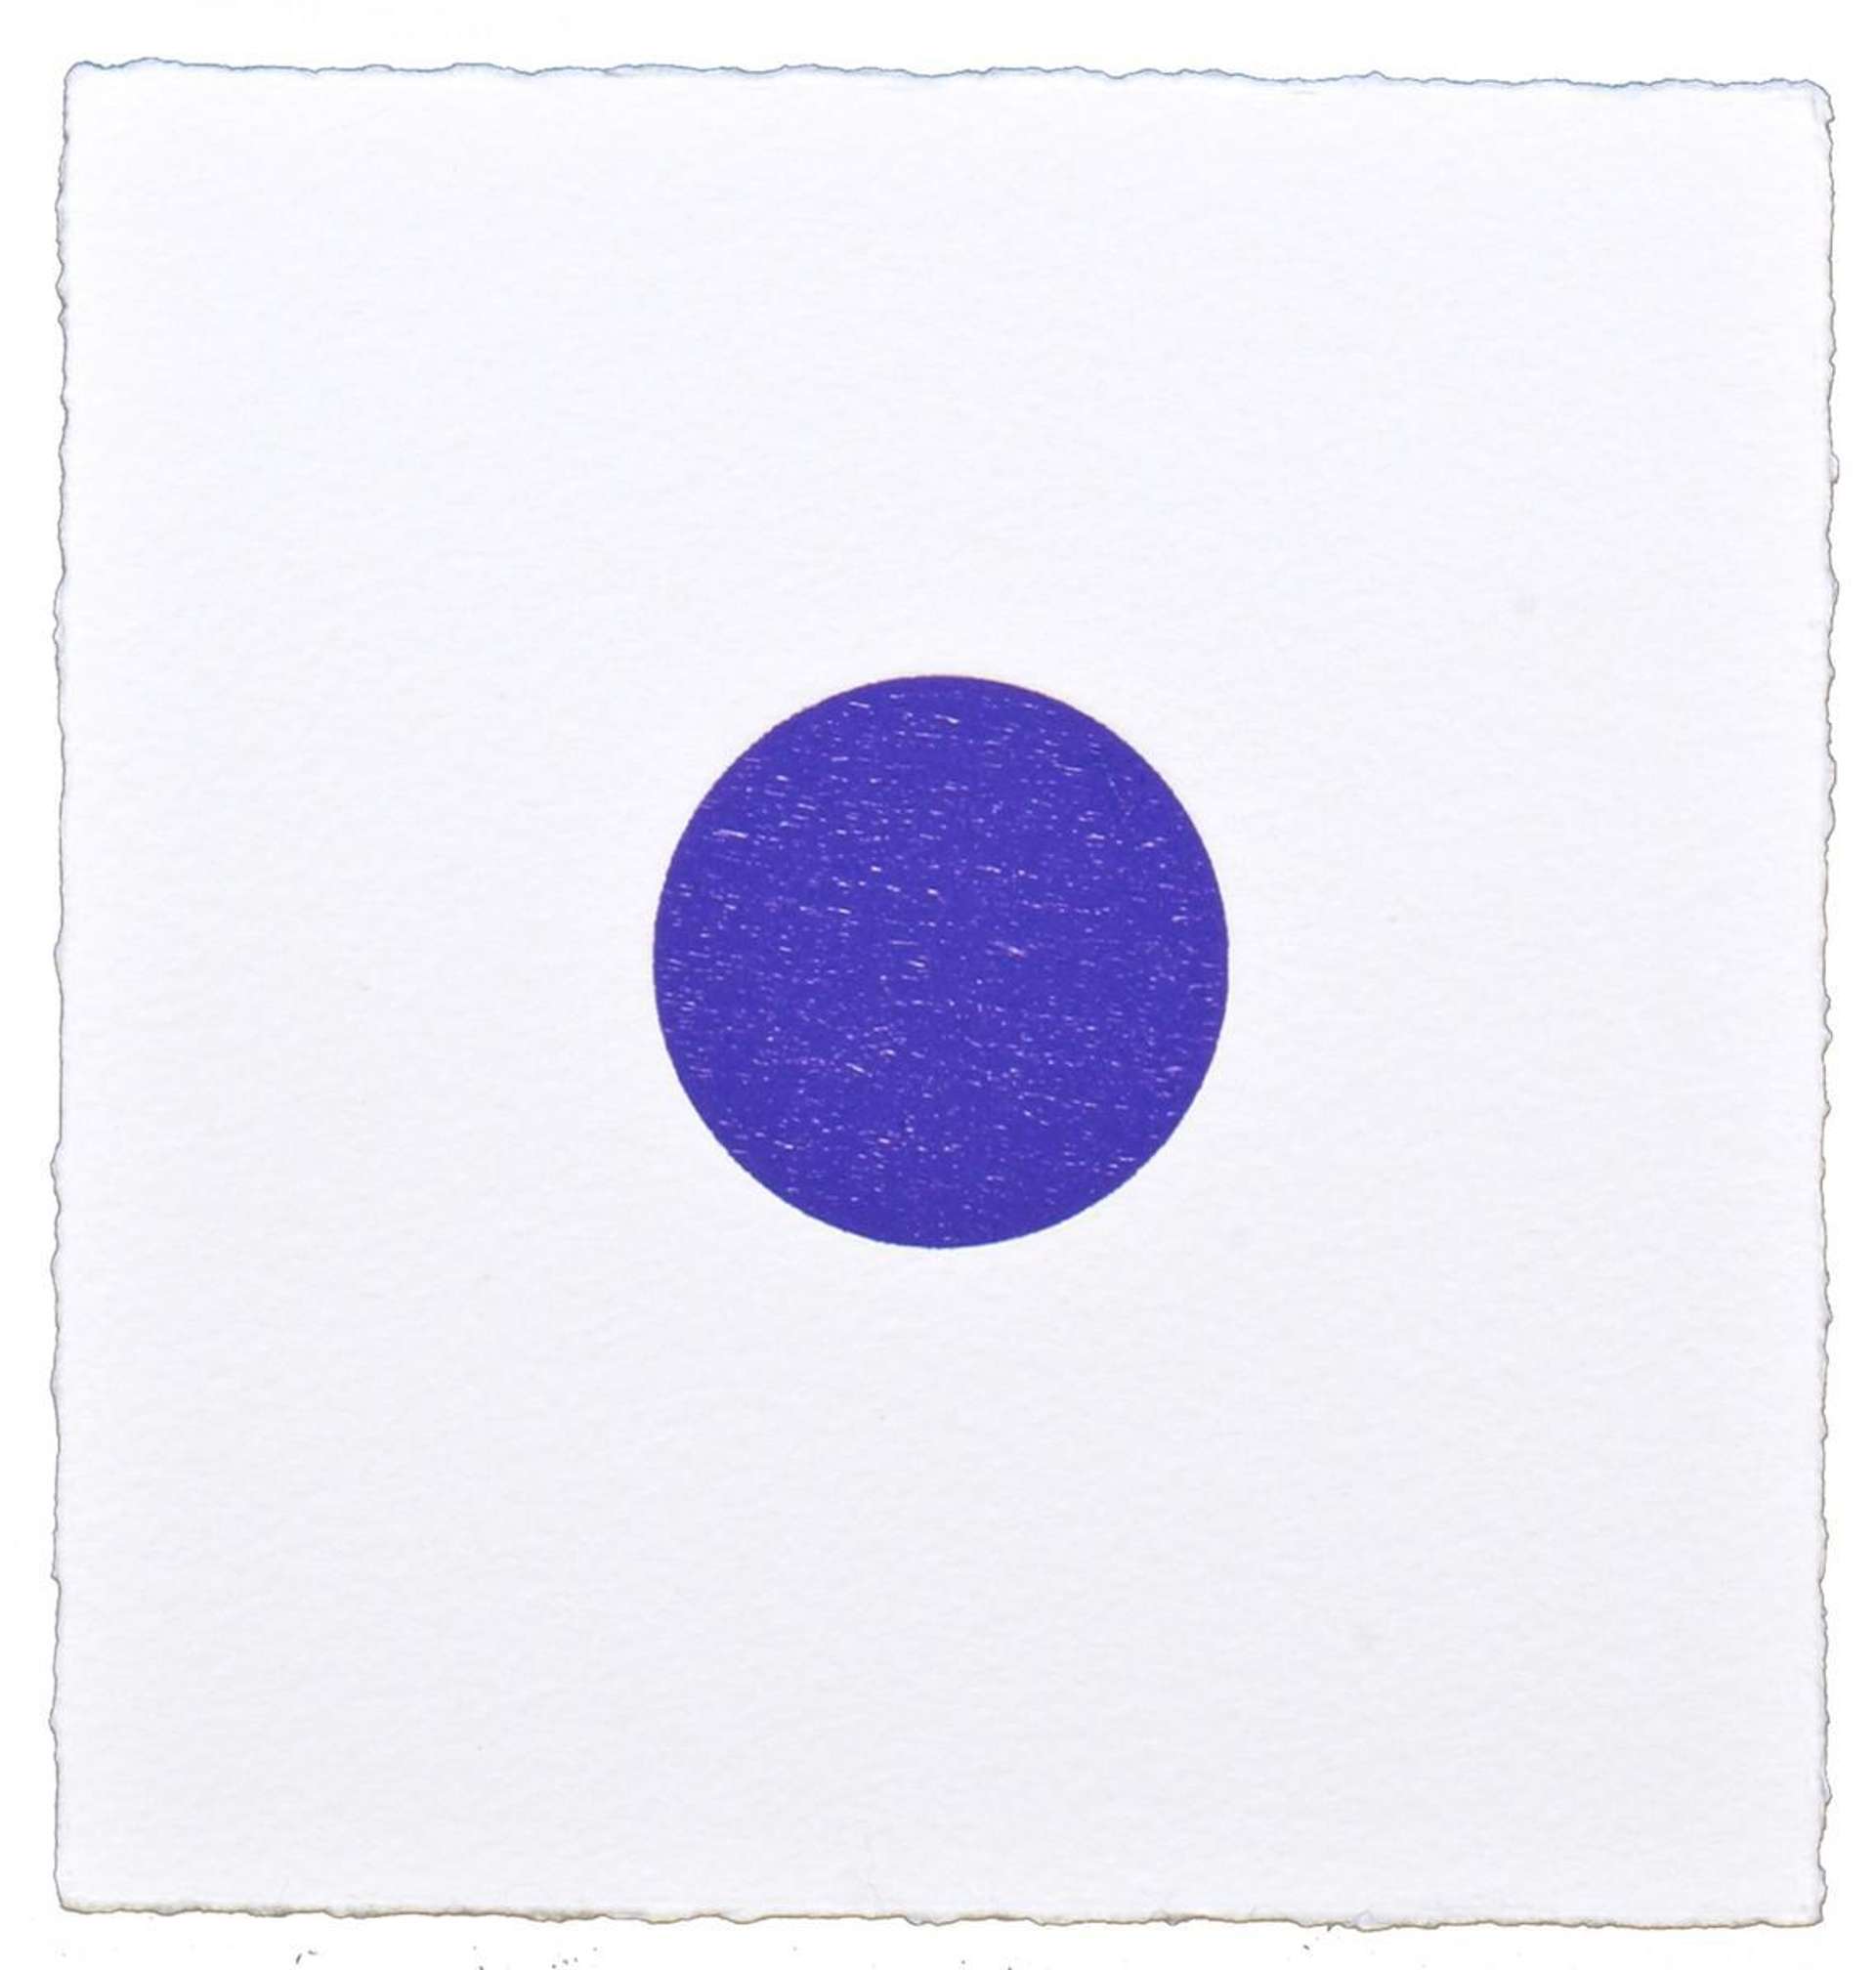 An image of the print Isostearic Acid by Damien Hirst, showing a royal blue dot in the centre of a white composition.